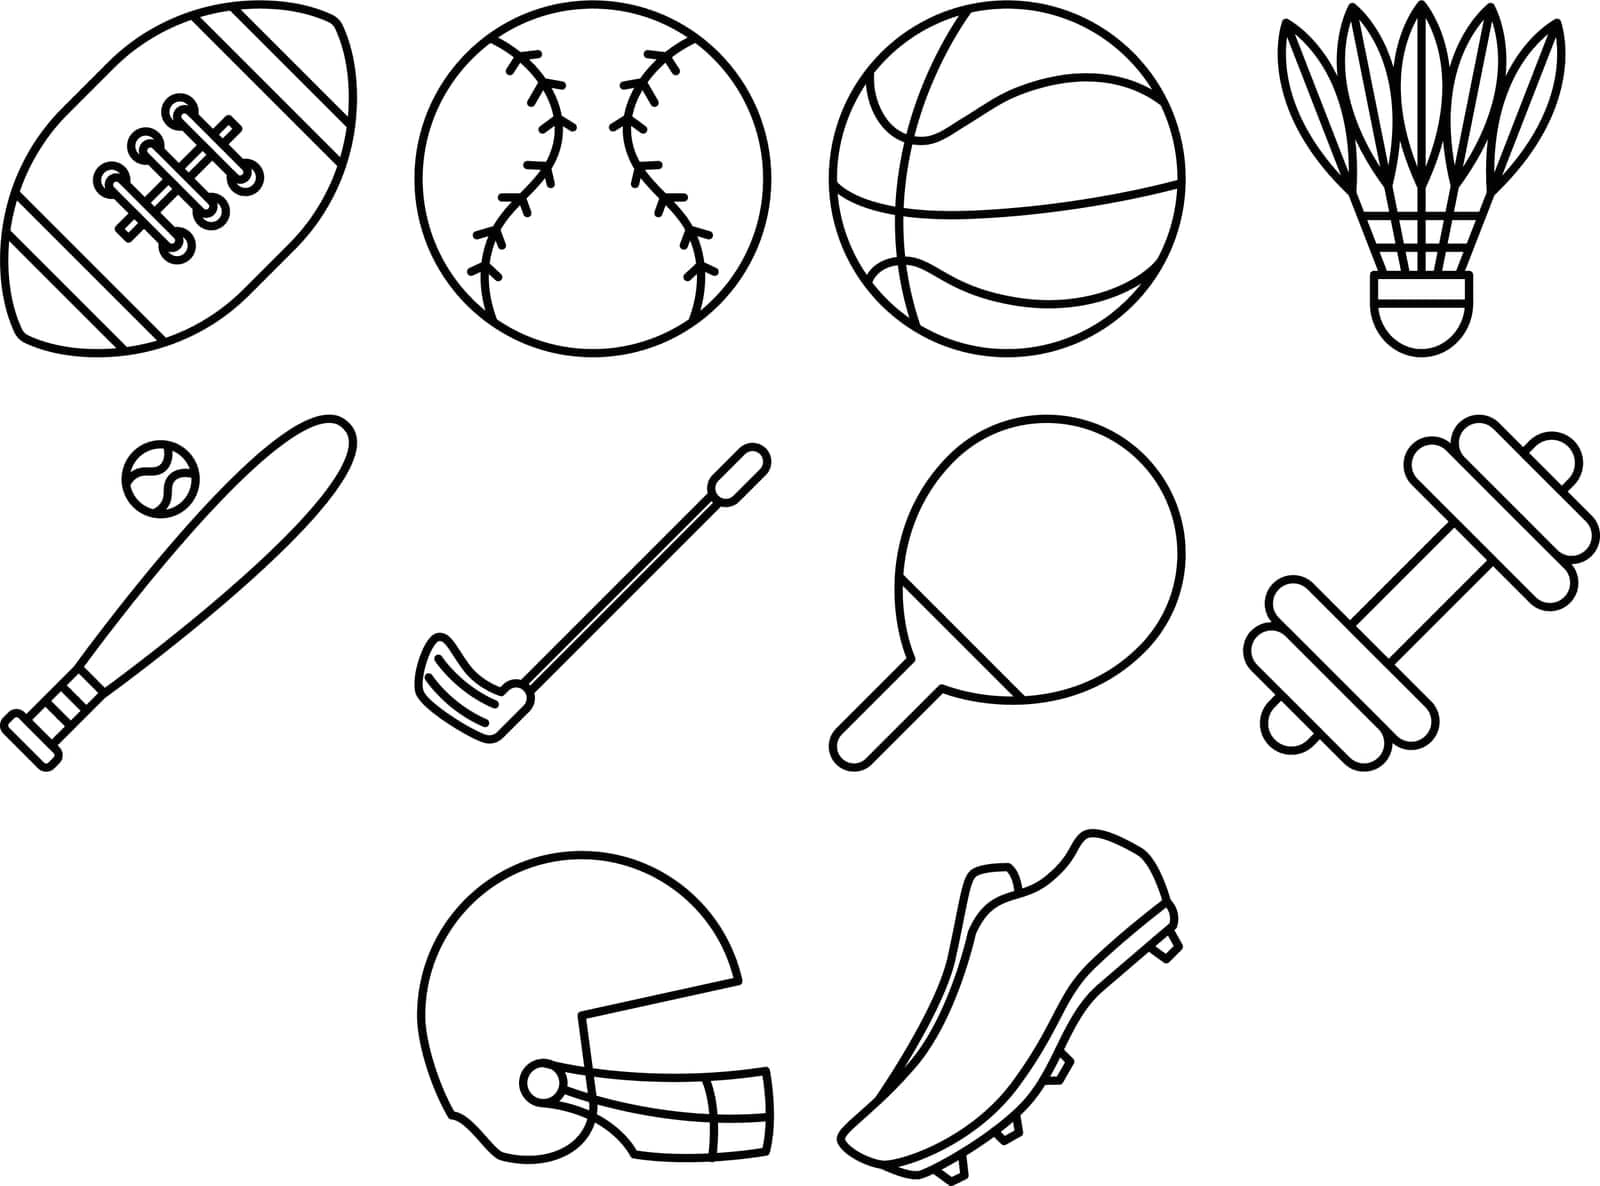 set,cartoon,american,football,rugby,icon,badminton,simple,collection,tennis,weightlifting,golf,basketball,flat,design,logo,baseball,vector,illustration,table,sport by ogqcorp